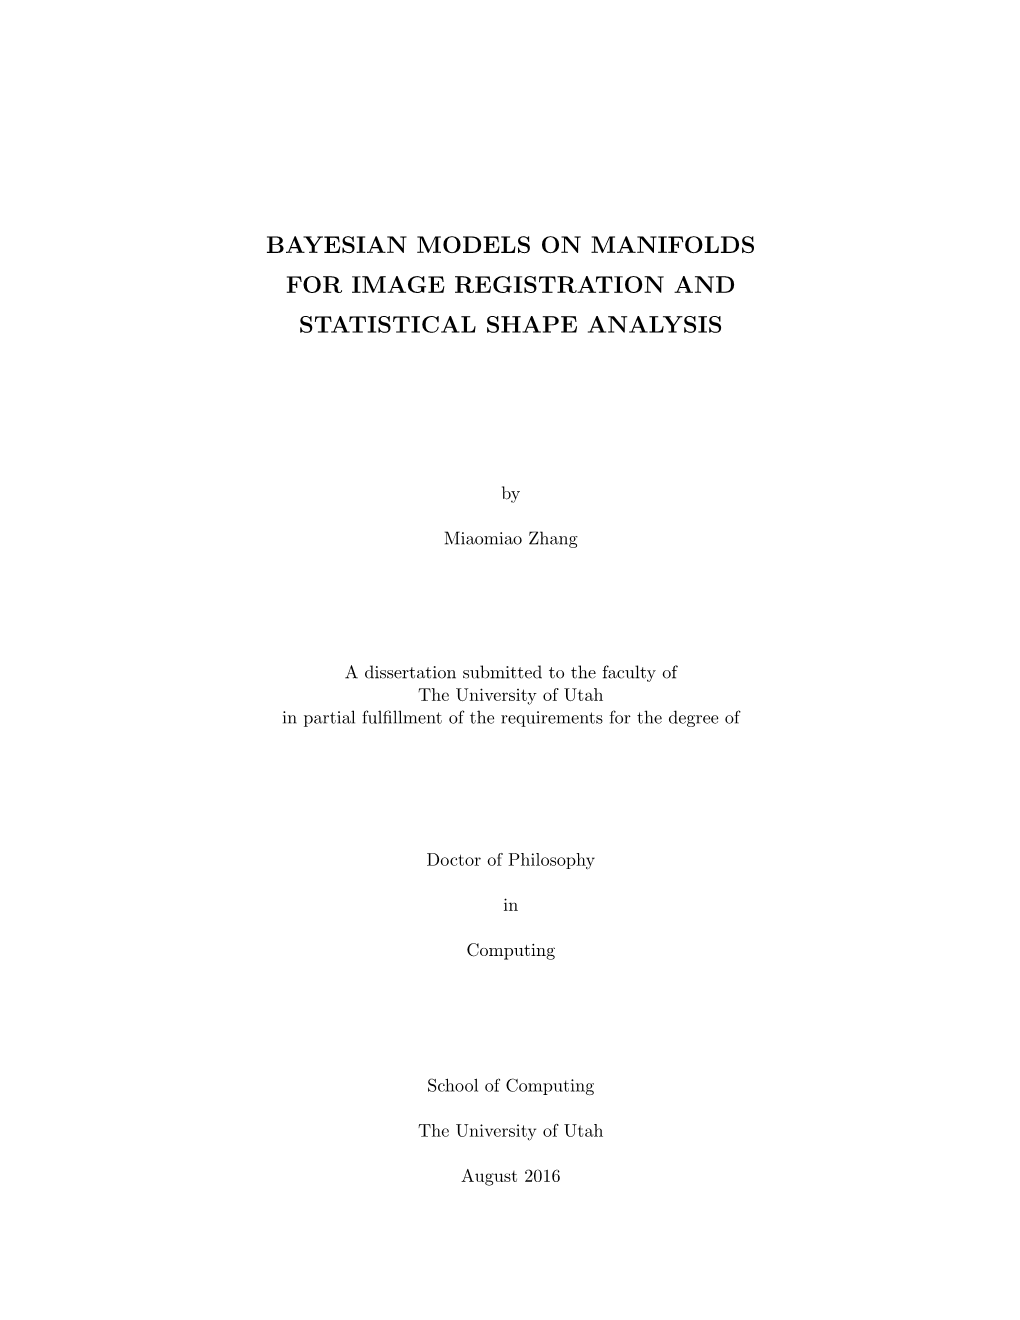 Bayesian Models on Manifolds for Image Registration and Statistical Shape Analysis